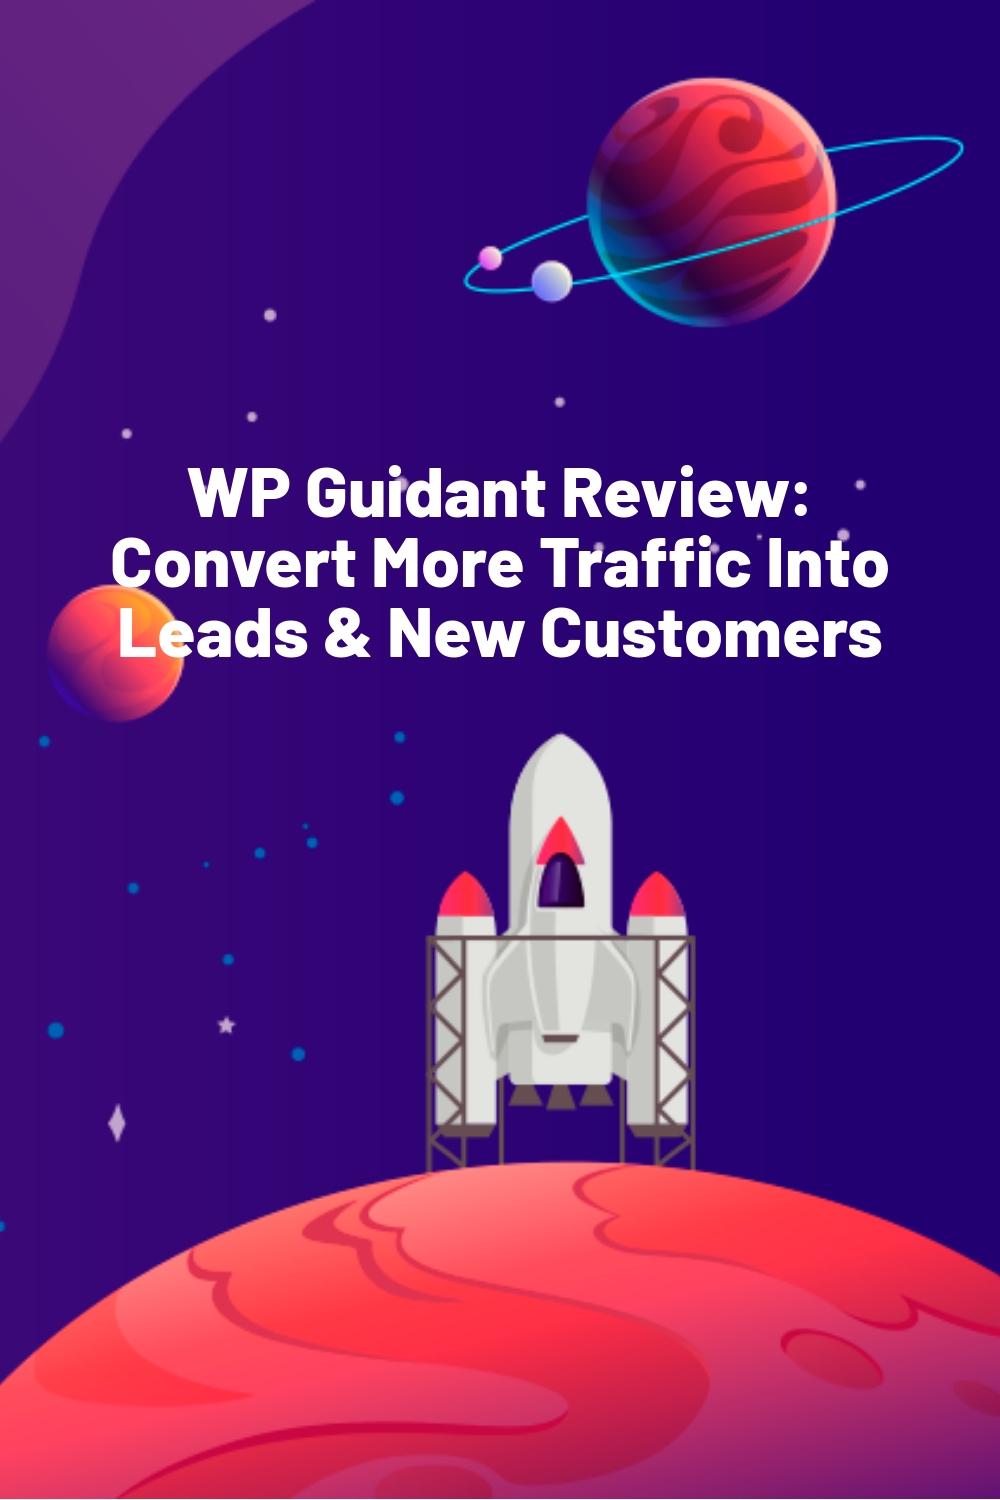 WP Guidant Review: Convert More Traffic Into Leads & New Customers